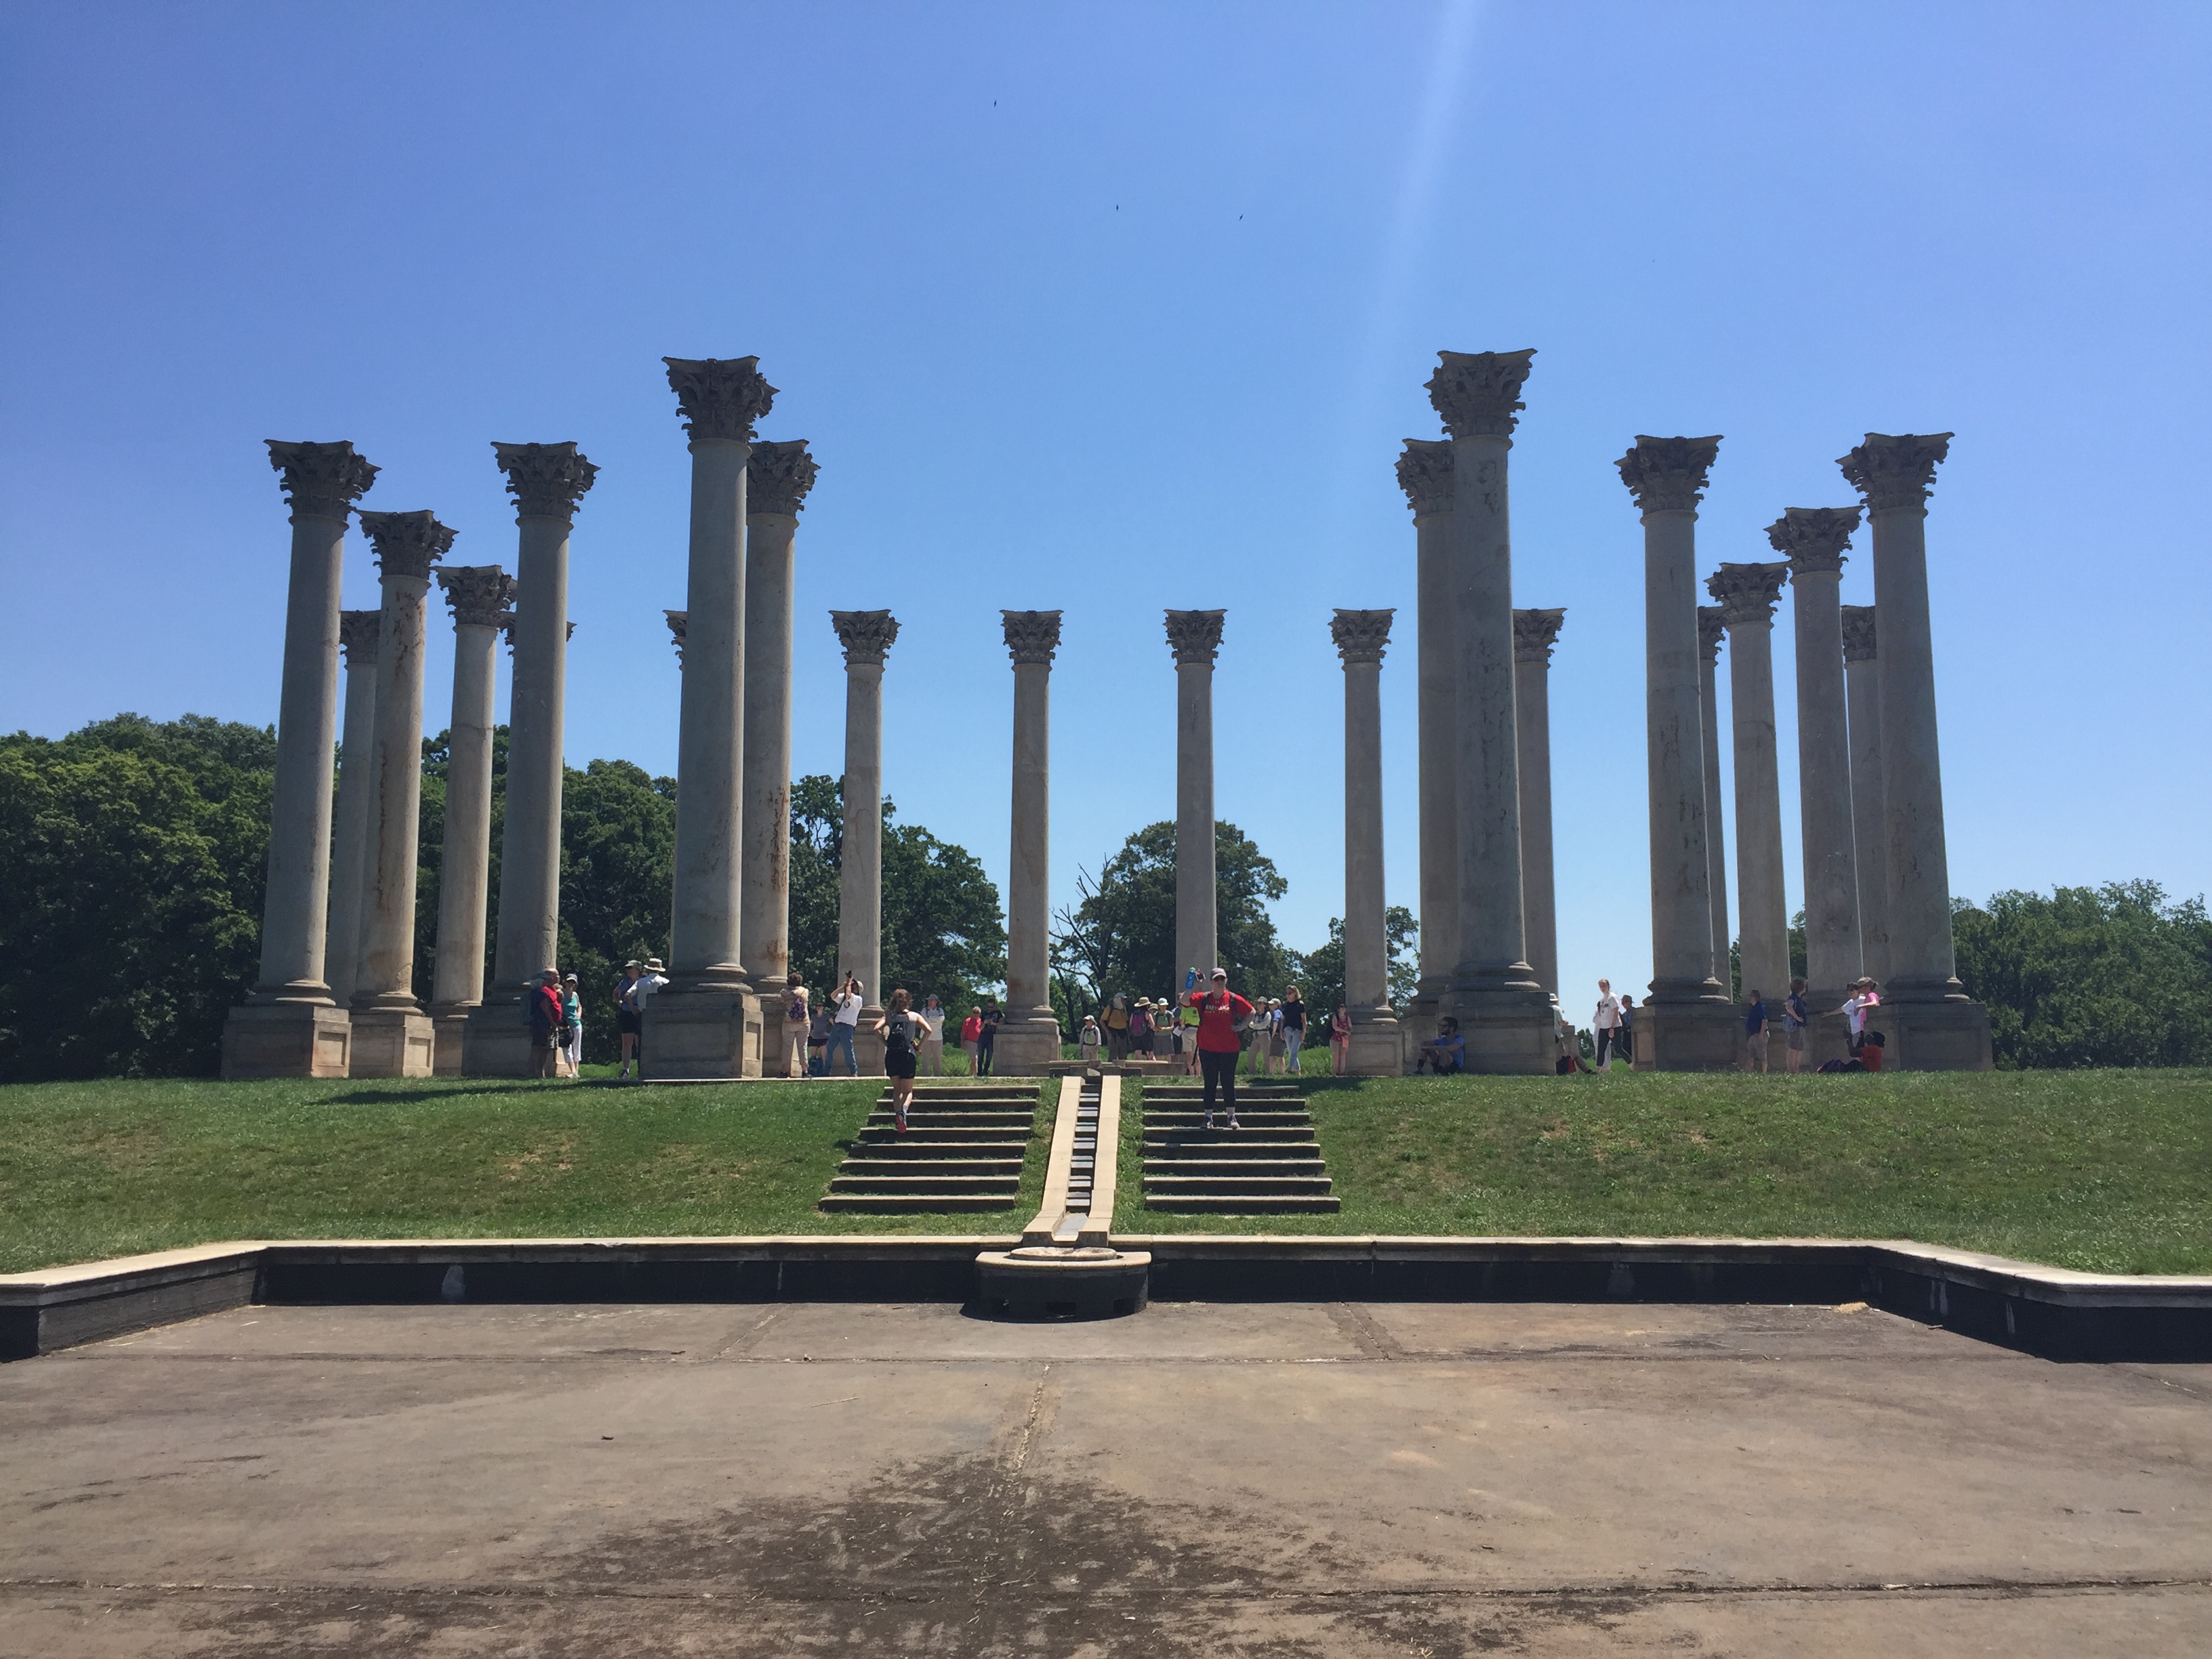 Group stands among old Capitol Columns